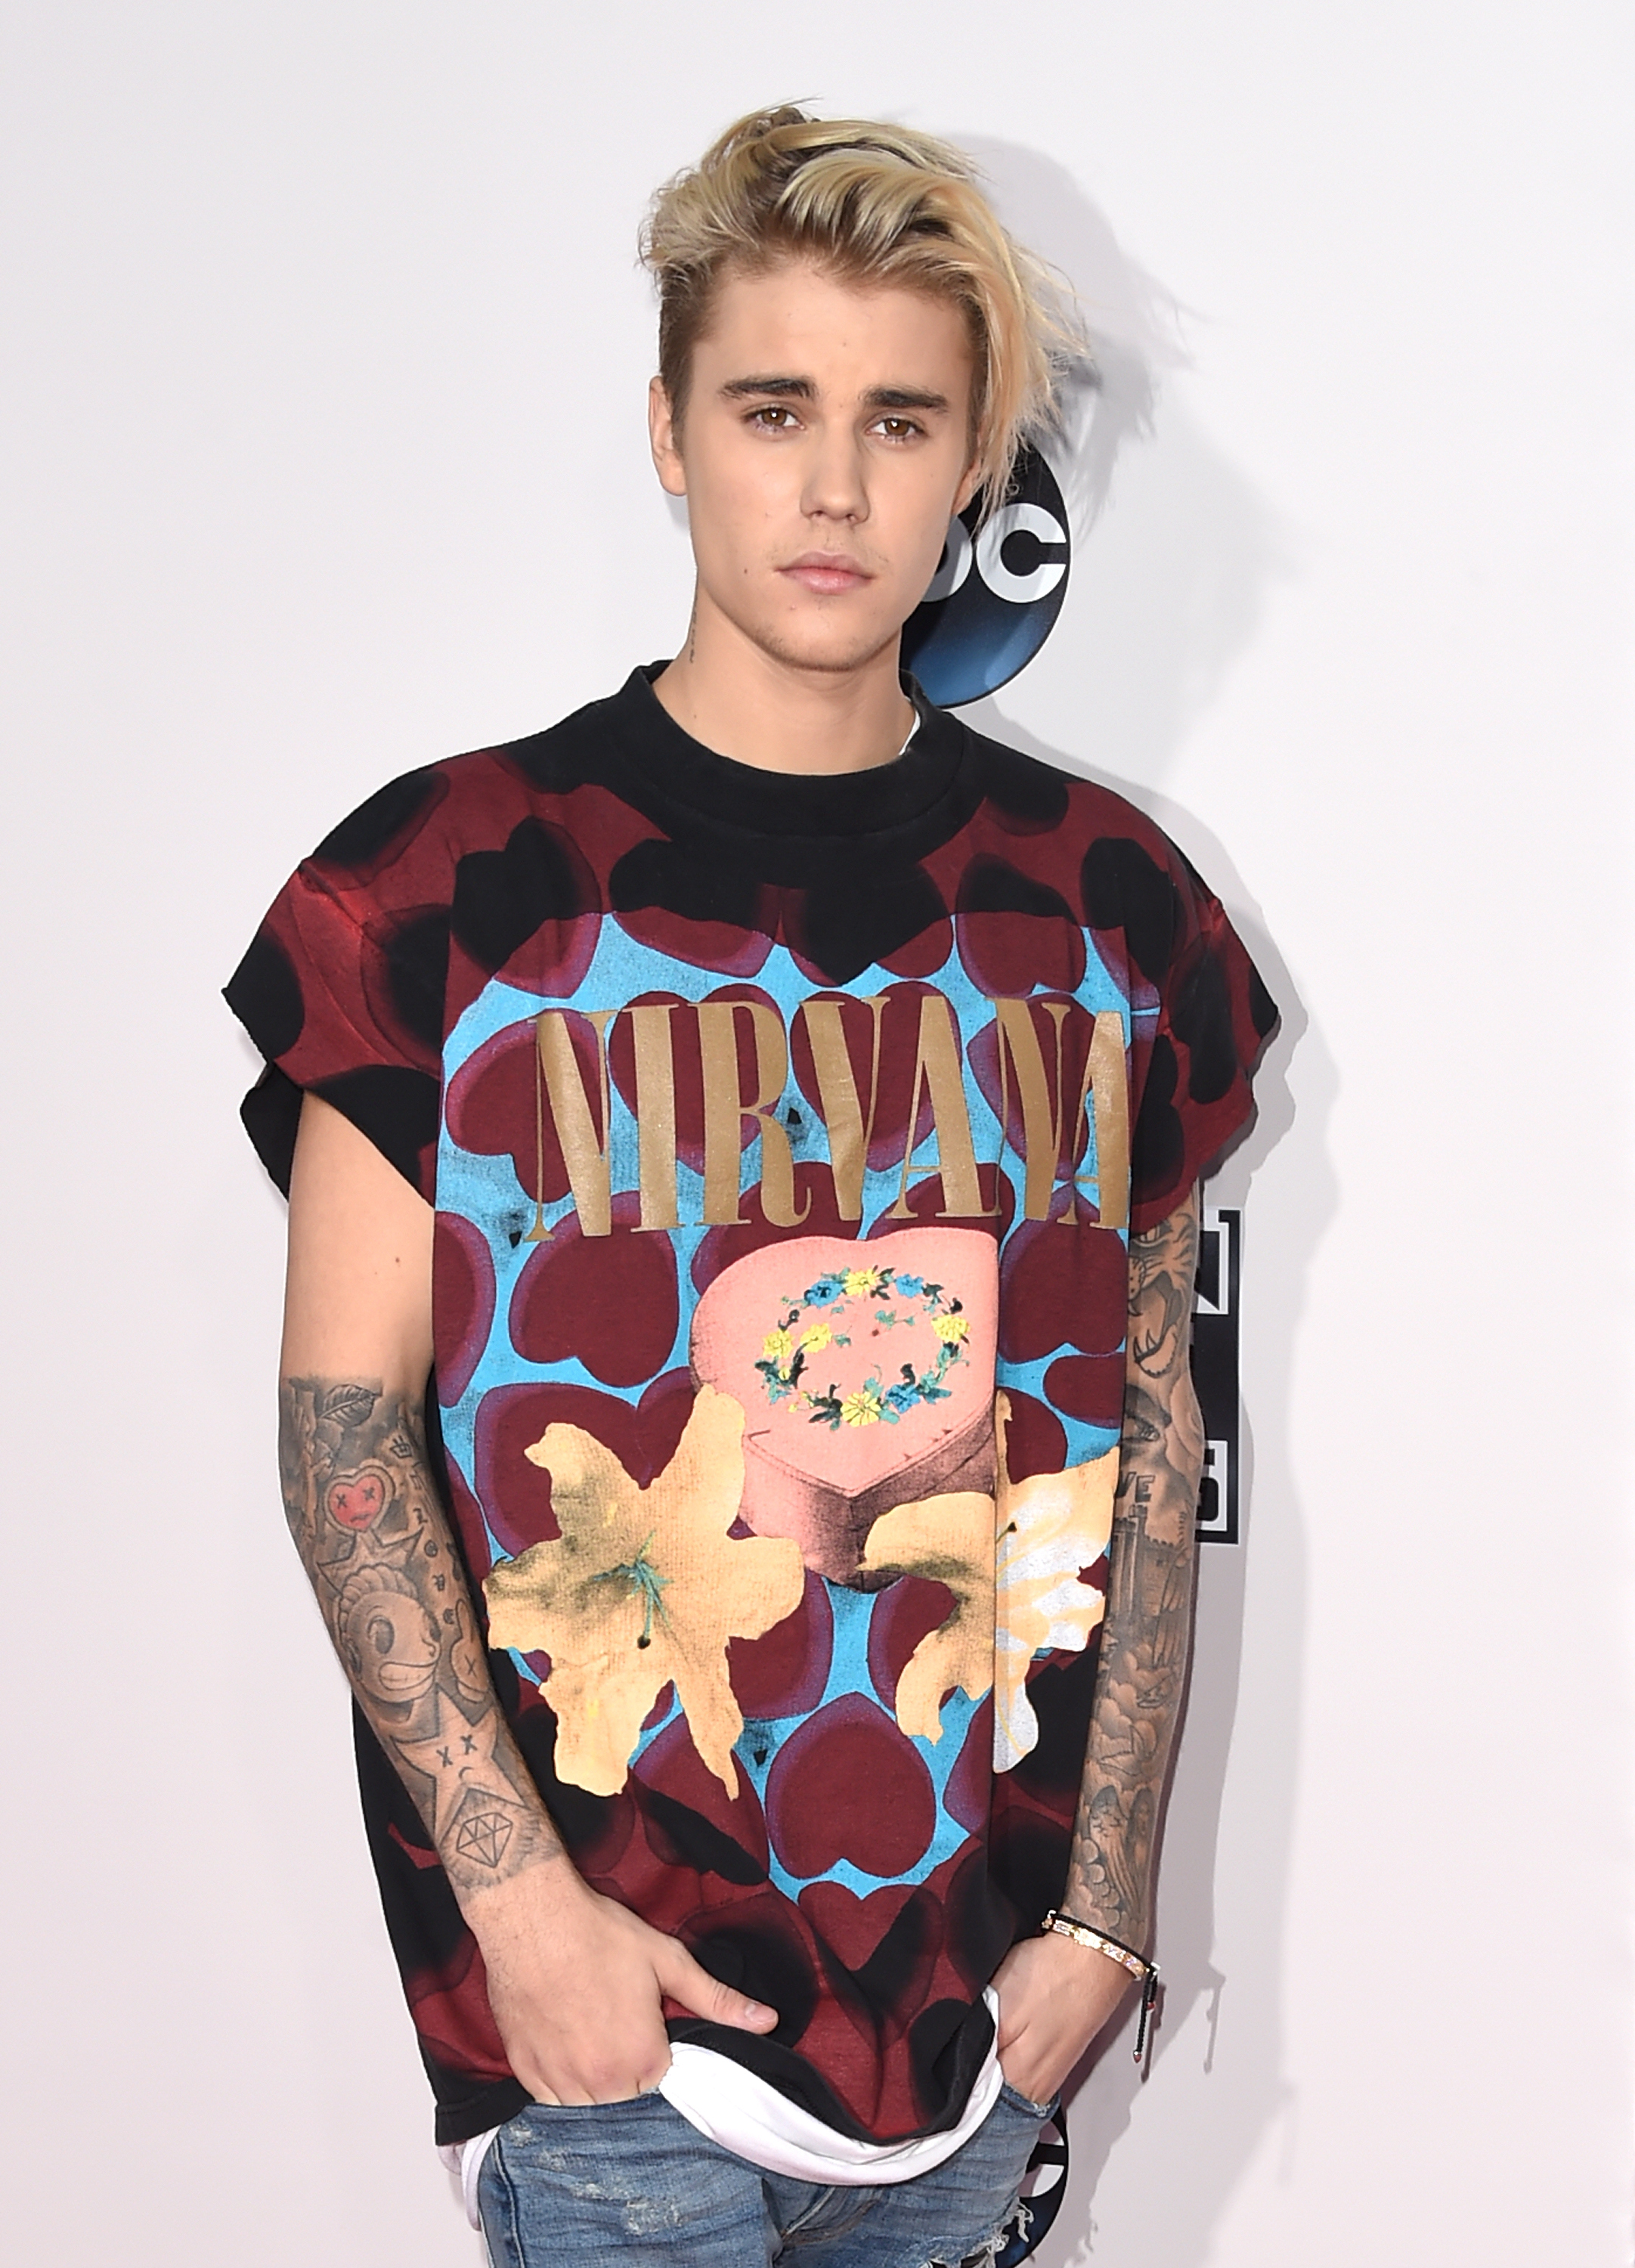 Does Justin Bieber Have Purple Hair The Singer Debuted His